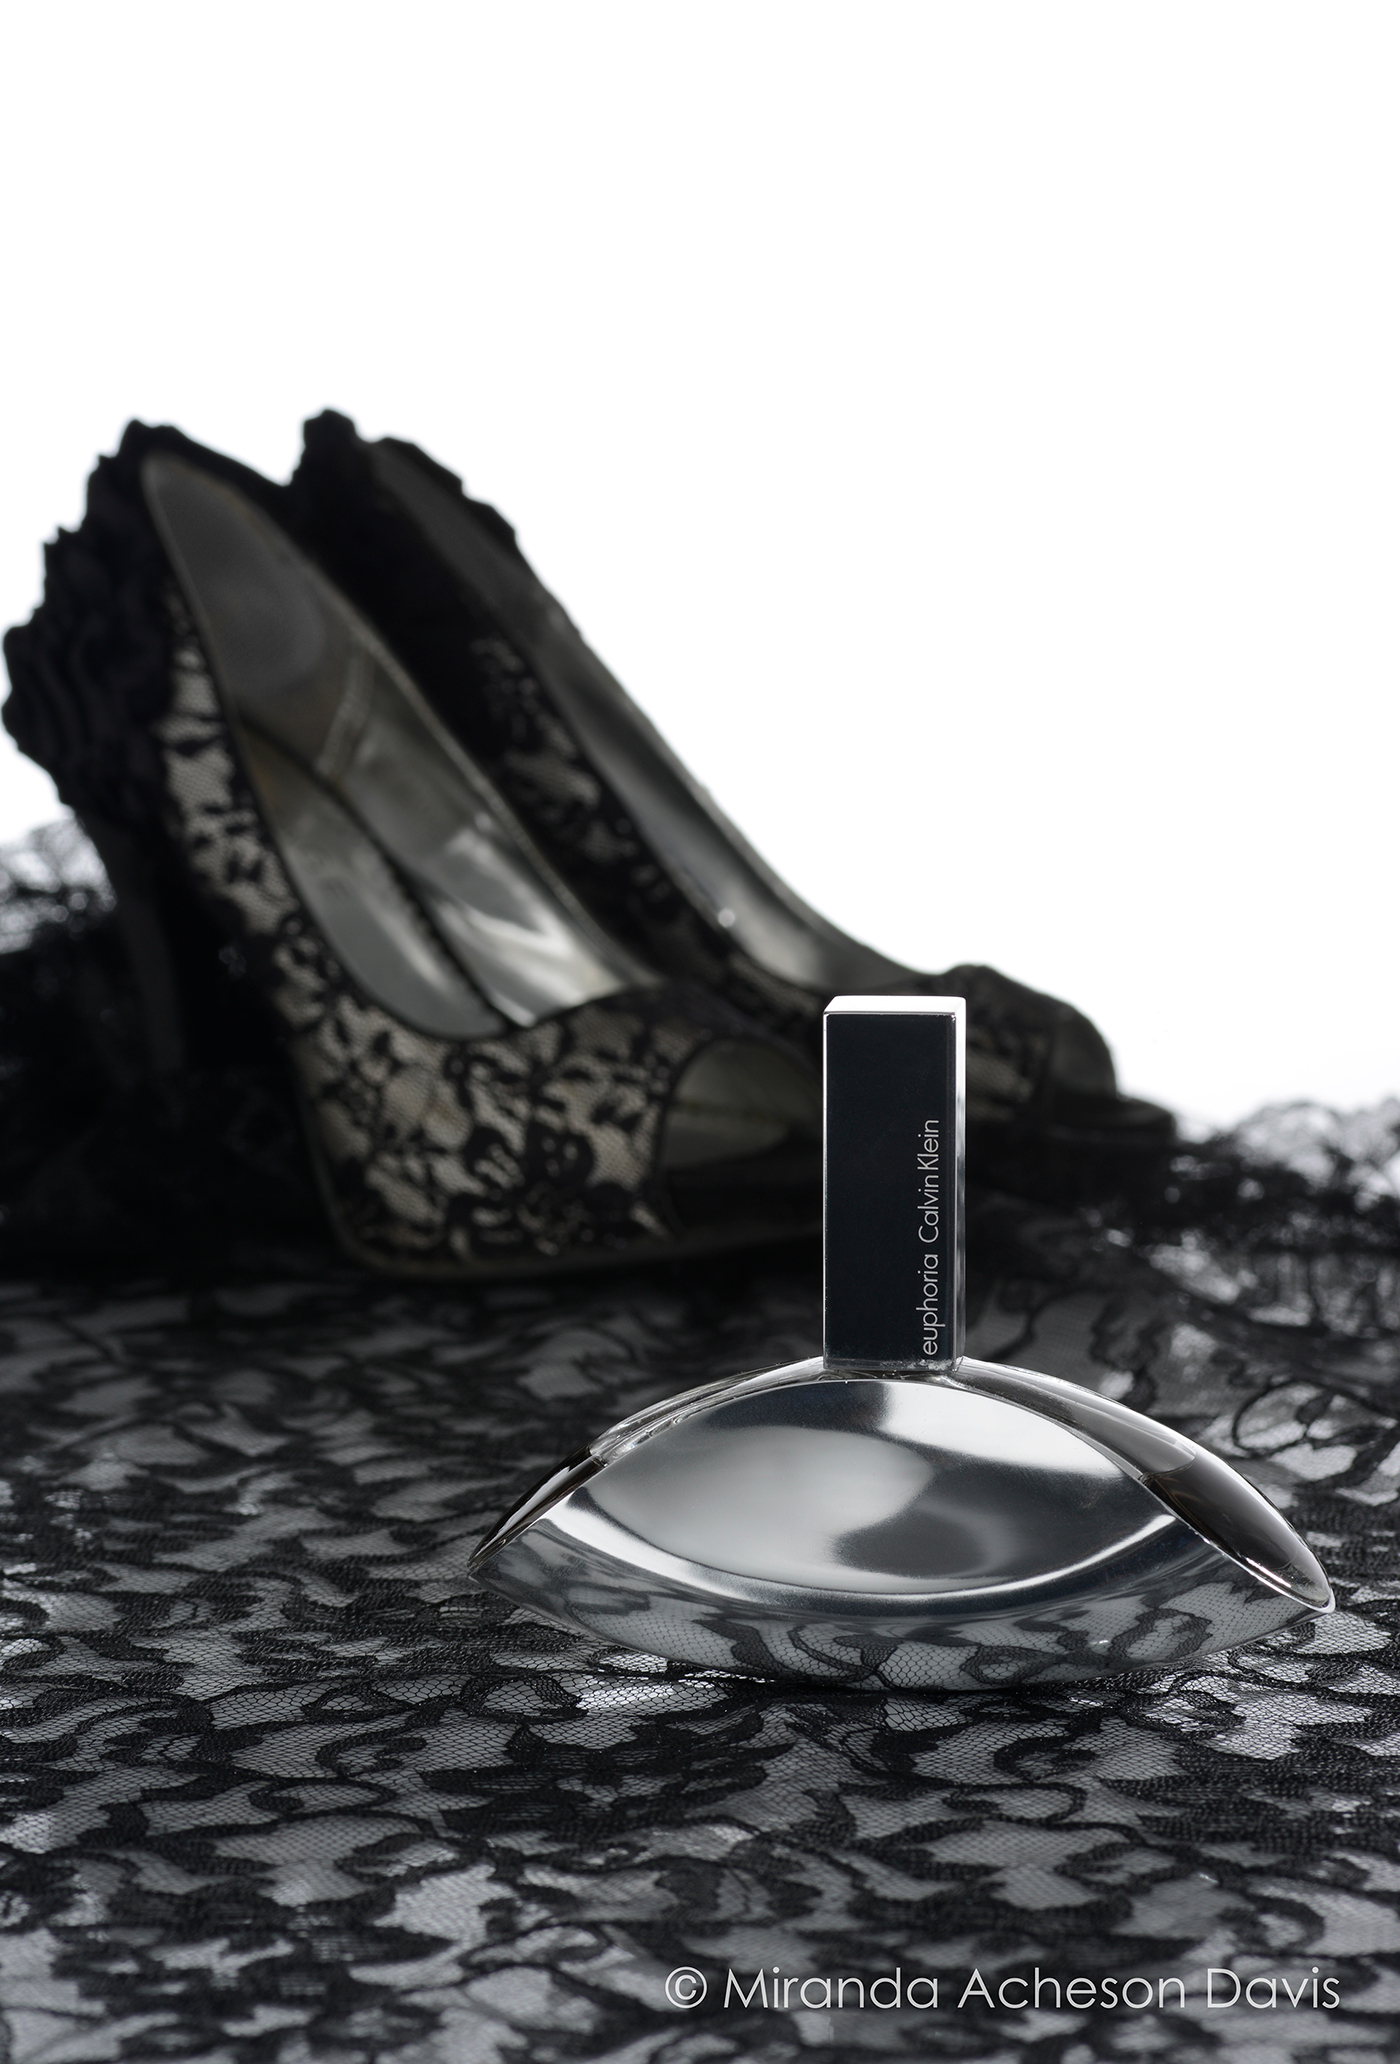 photoshoot commercial Commercial Photography jewelry perfume knives shoes